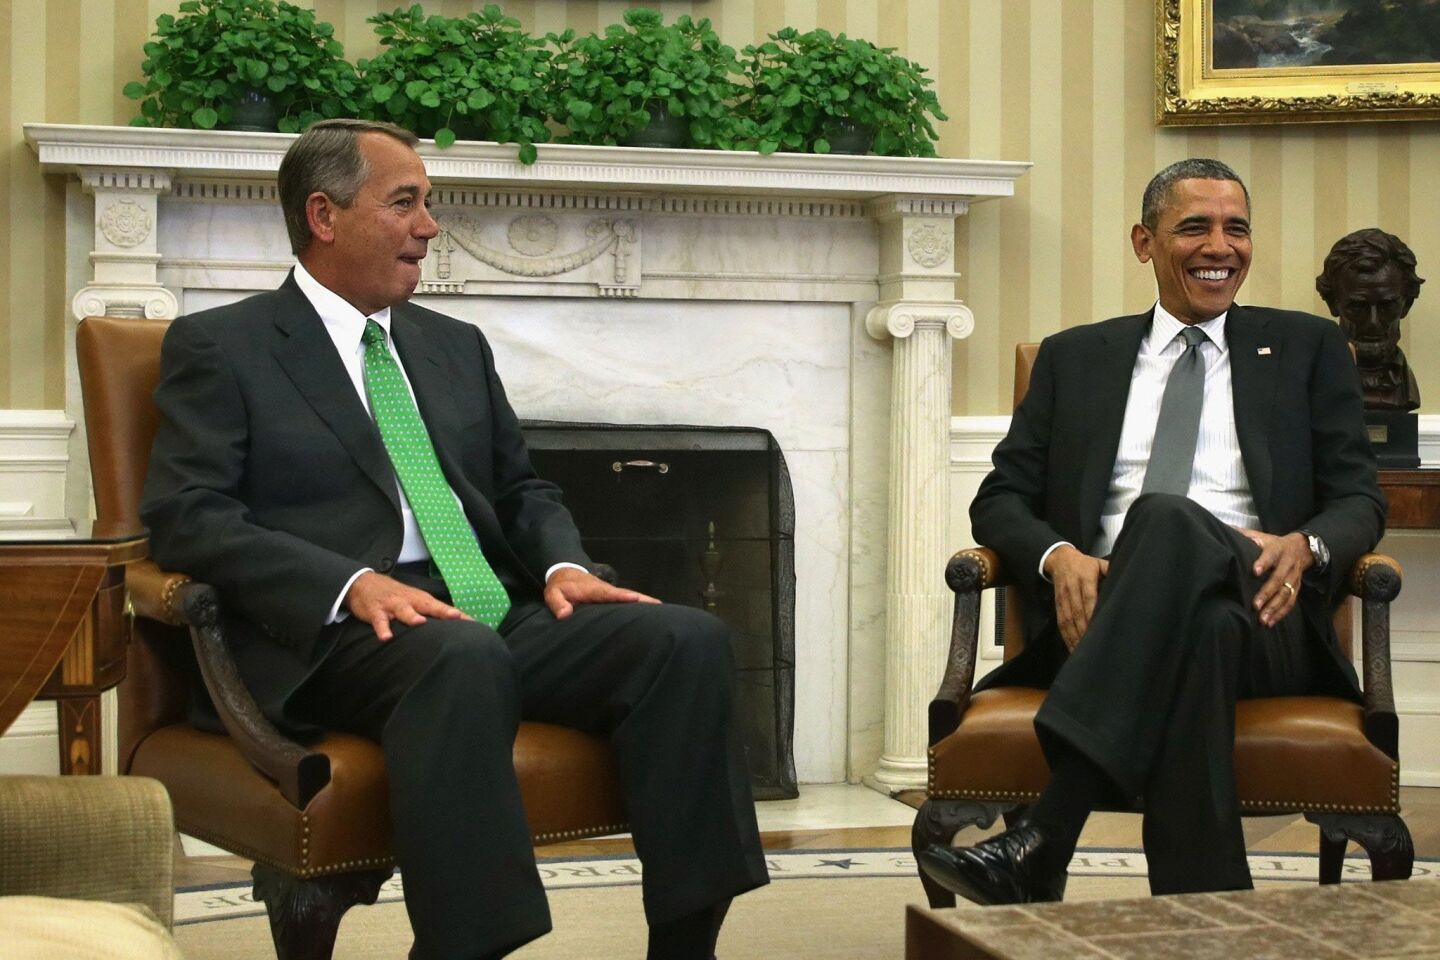 One year later, Boehner and Obama meet